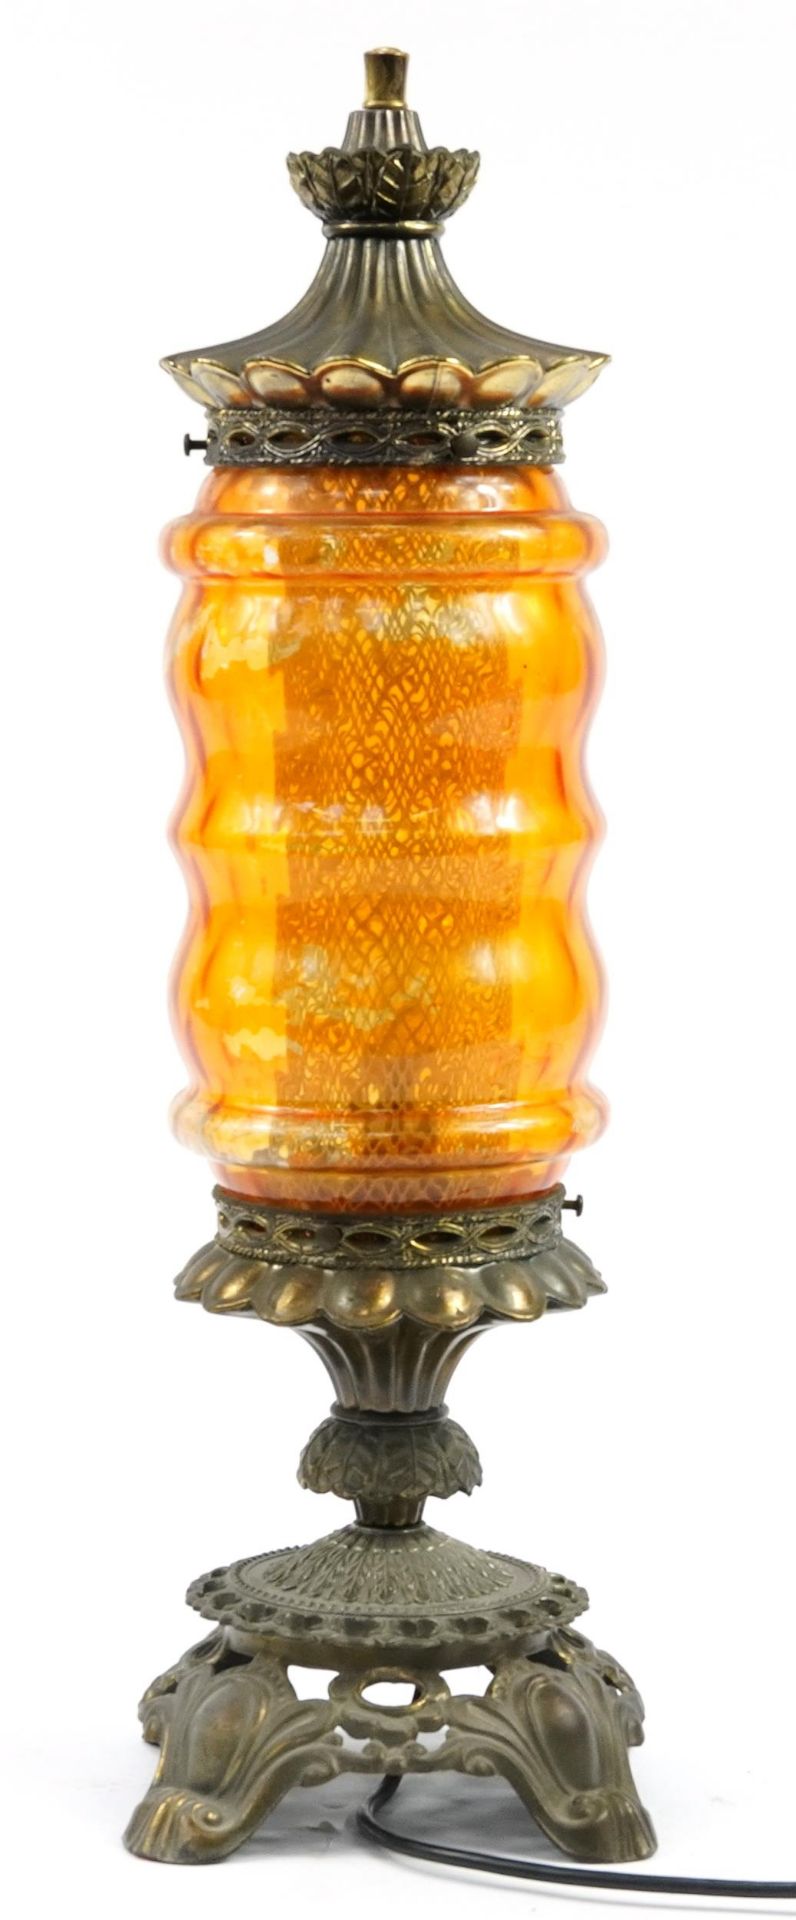 Ornate brass and orange coloured glass lamp, 60.5cm high - Image 2 of 3